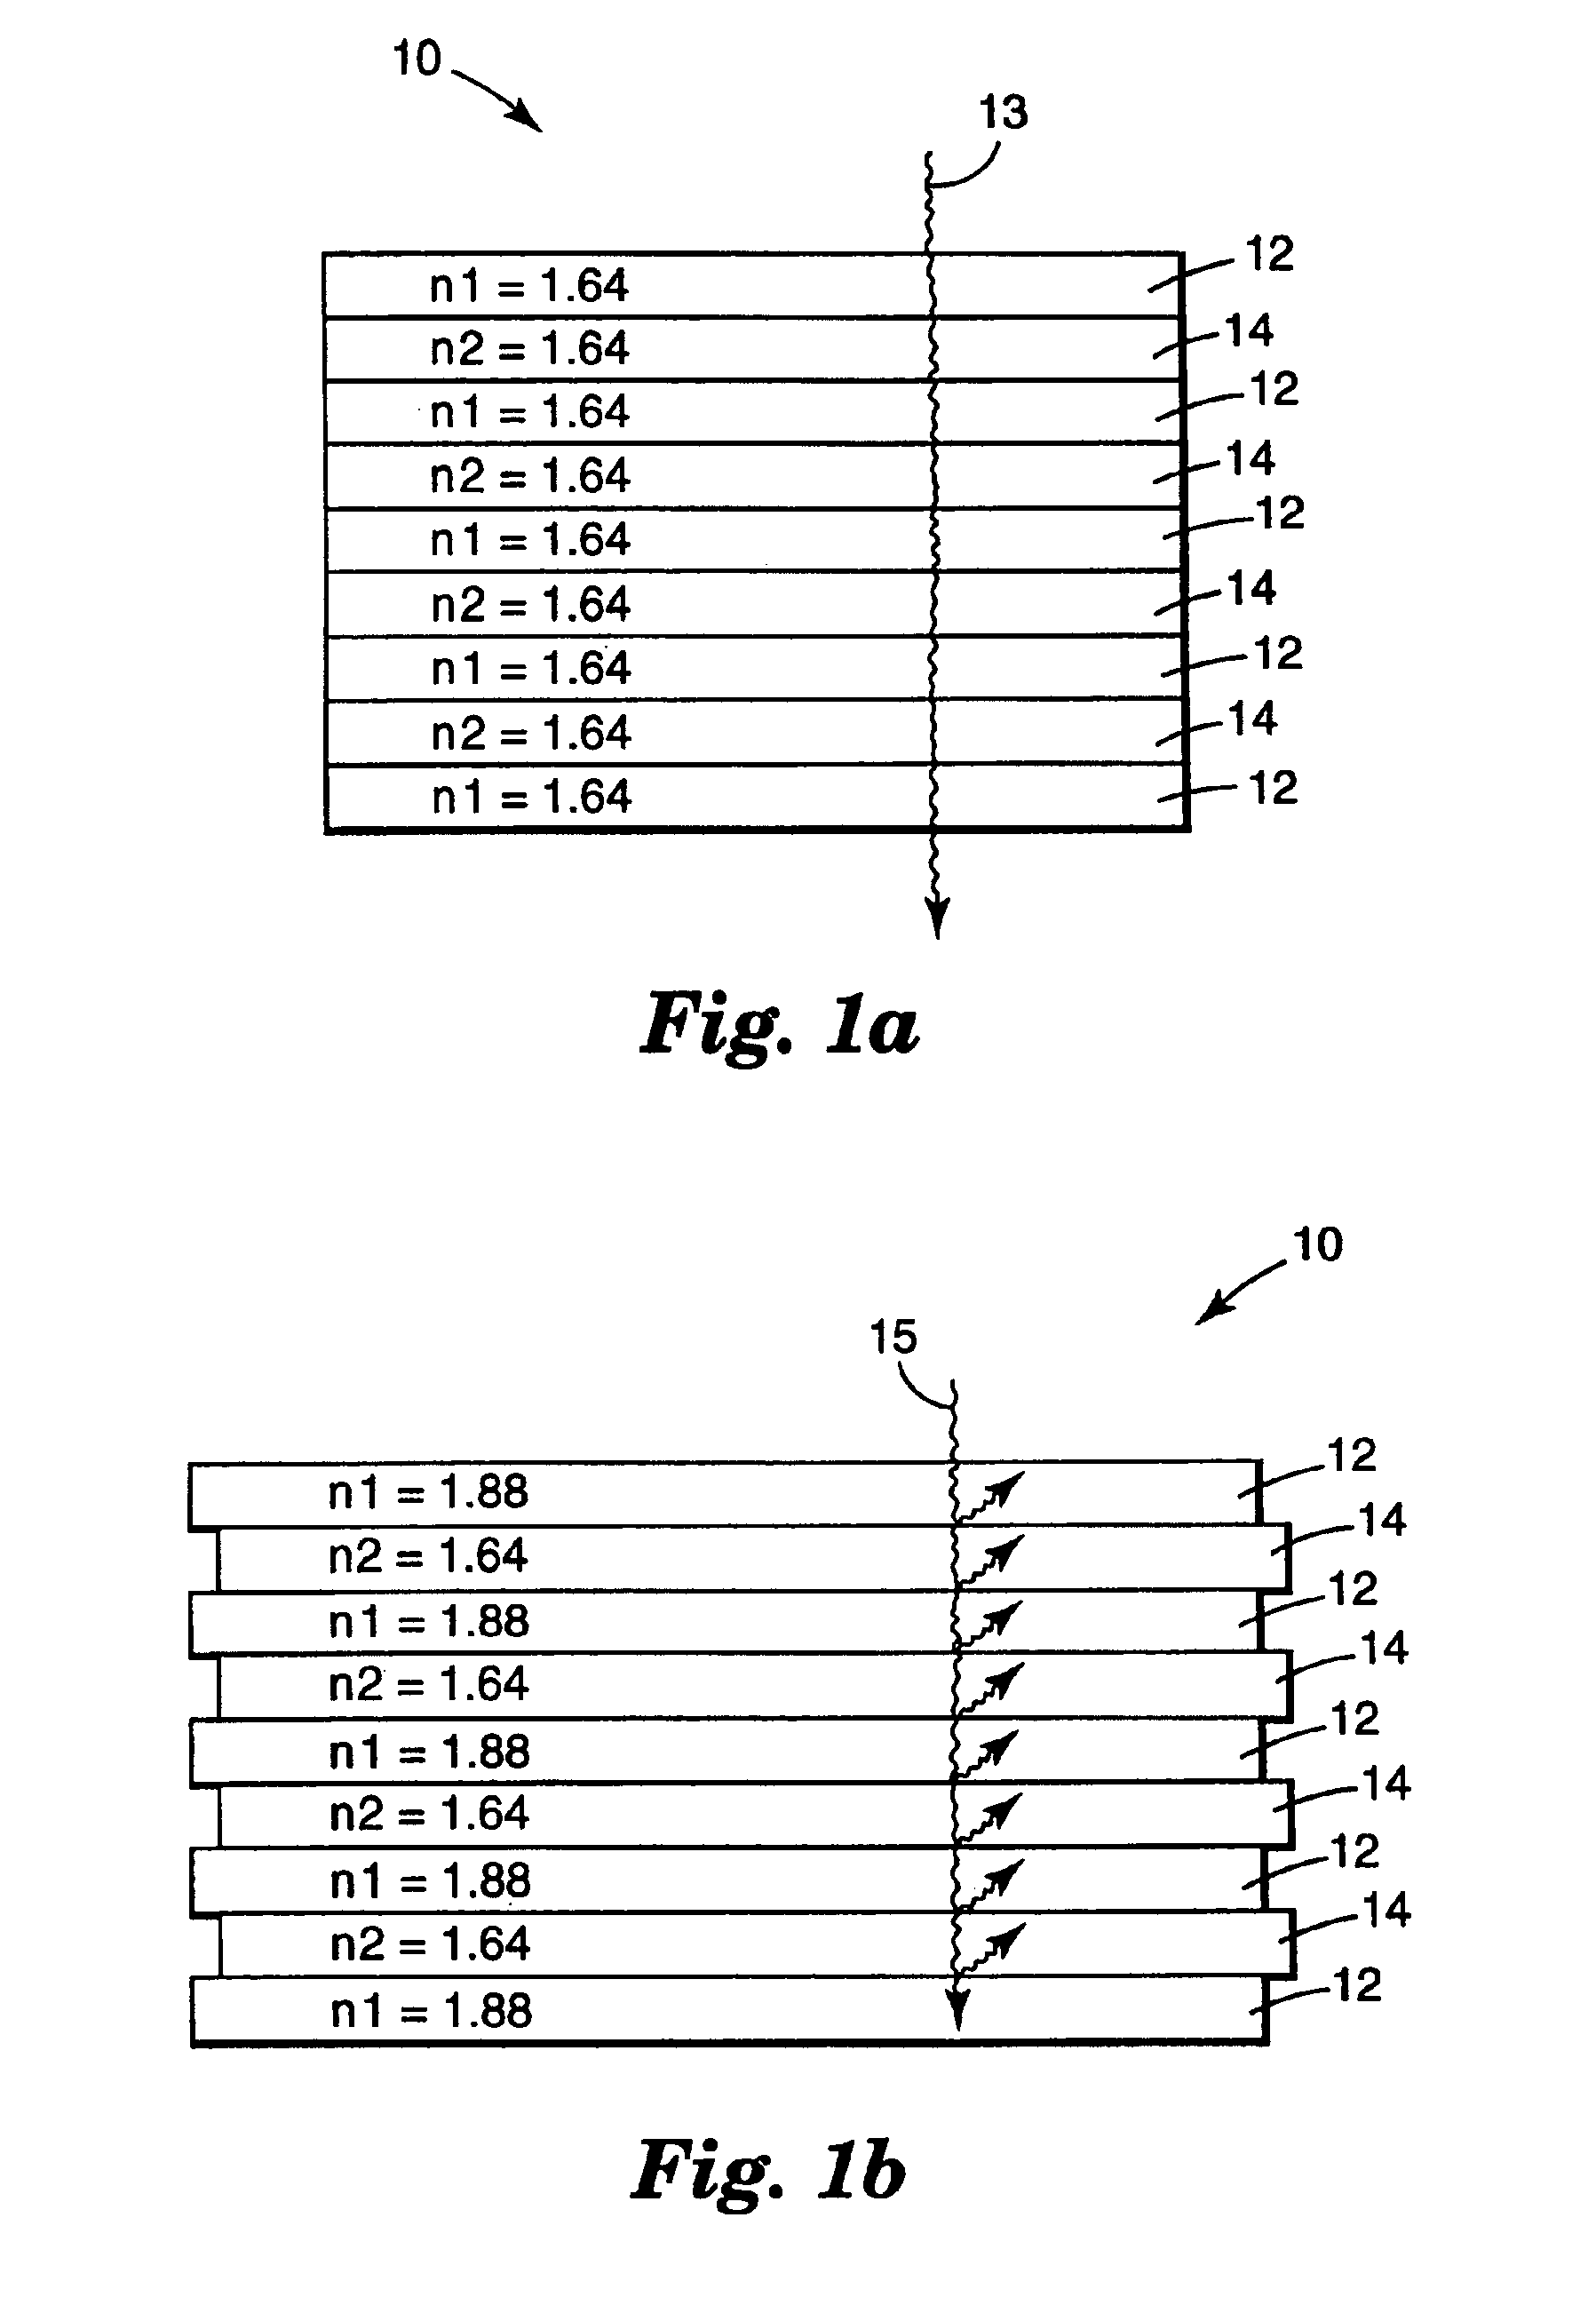 Backlight system with multilayer optical film reflector